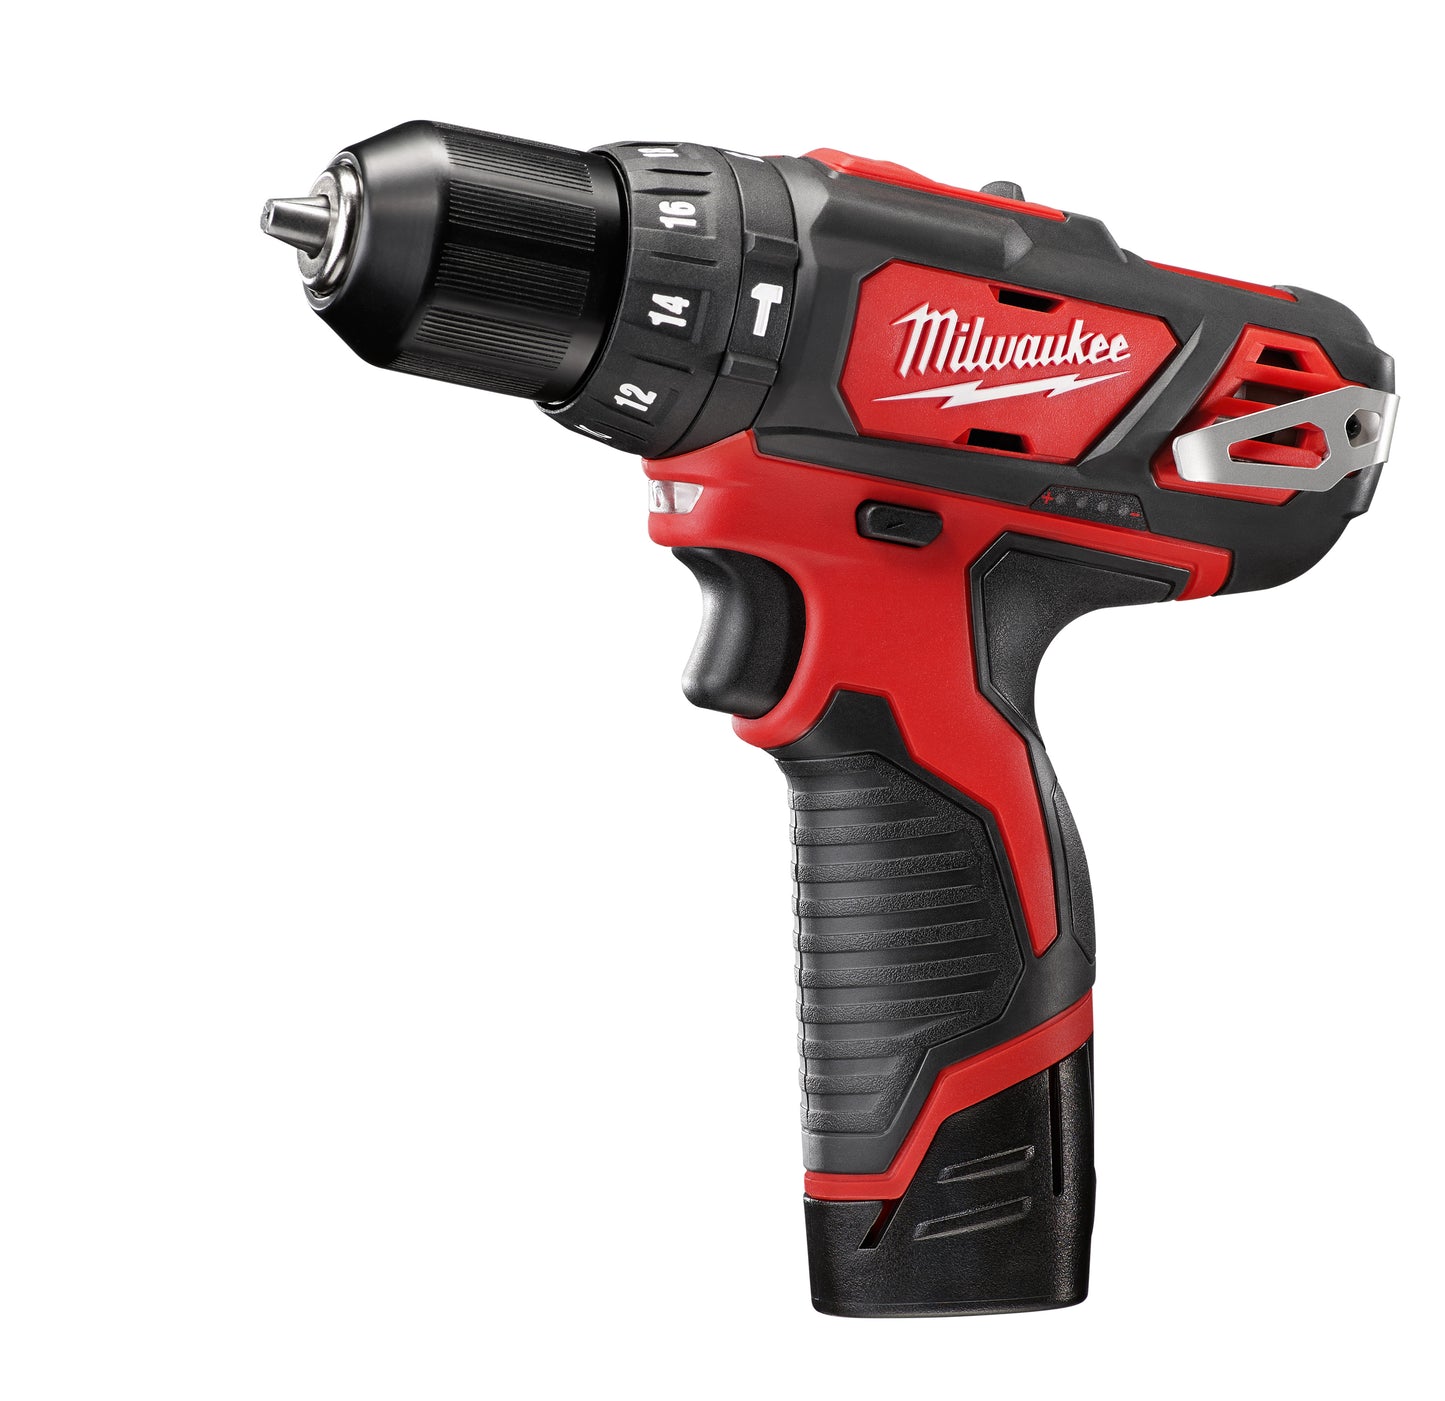 Milwaukee, 2408-22 M12 12 Volt Lithium-Ion Cordless 3/8 in. Hammer Drill/Driver Kit